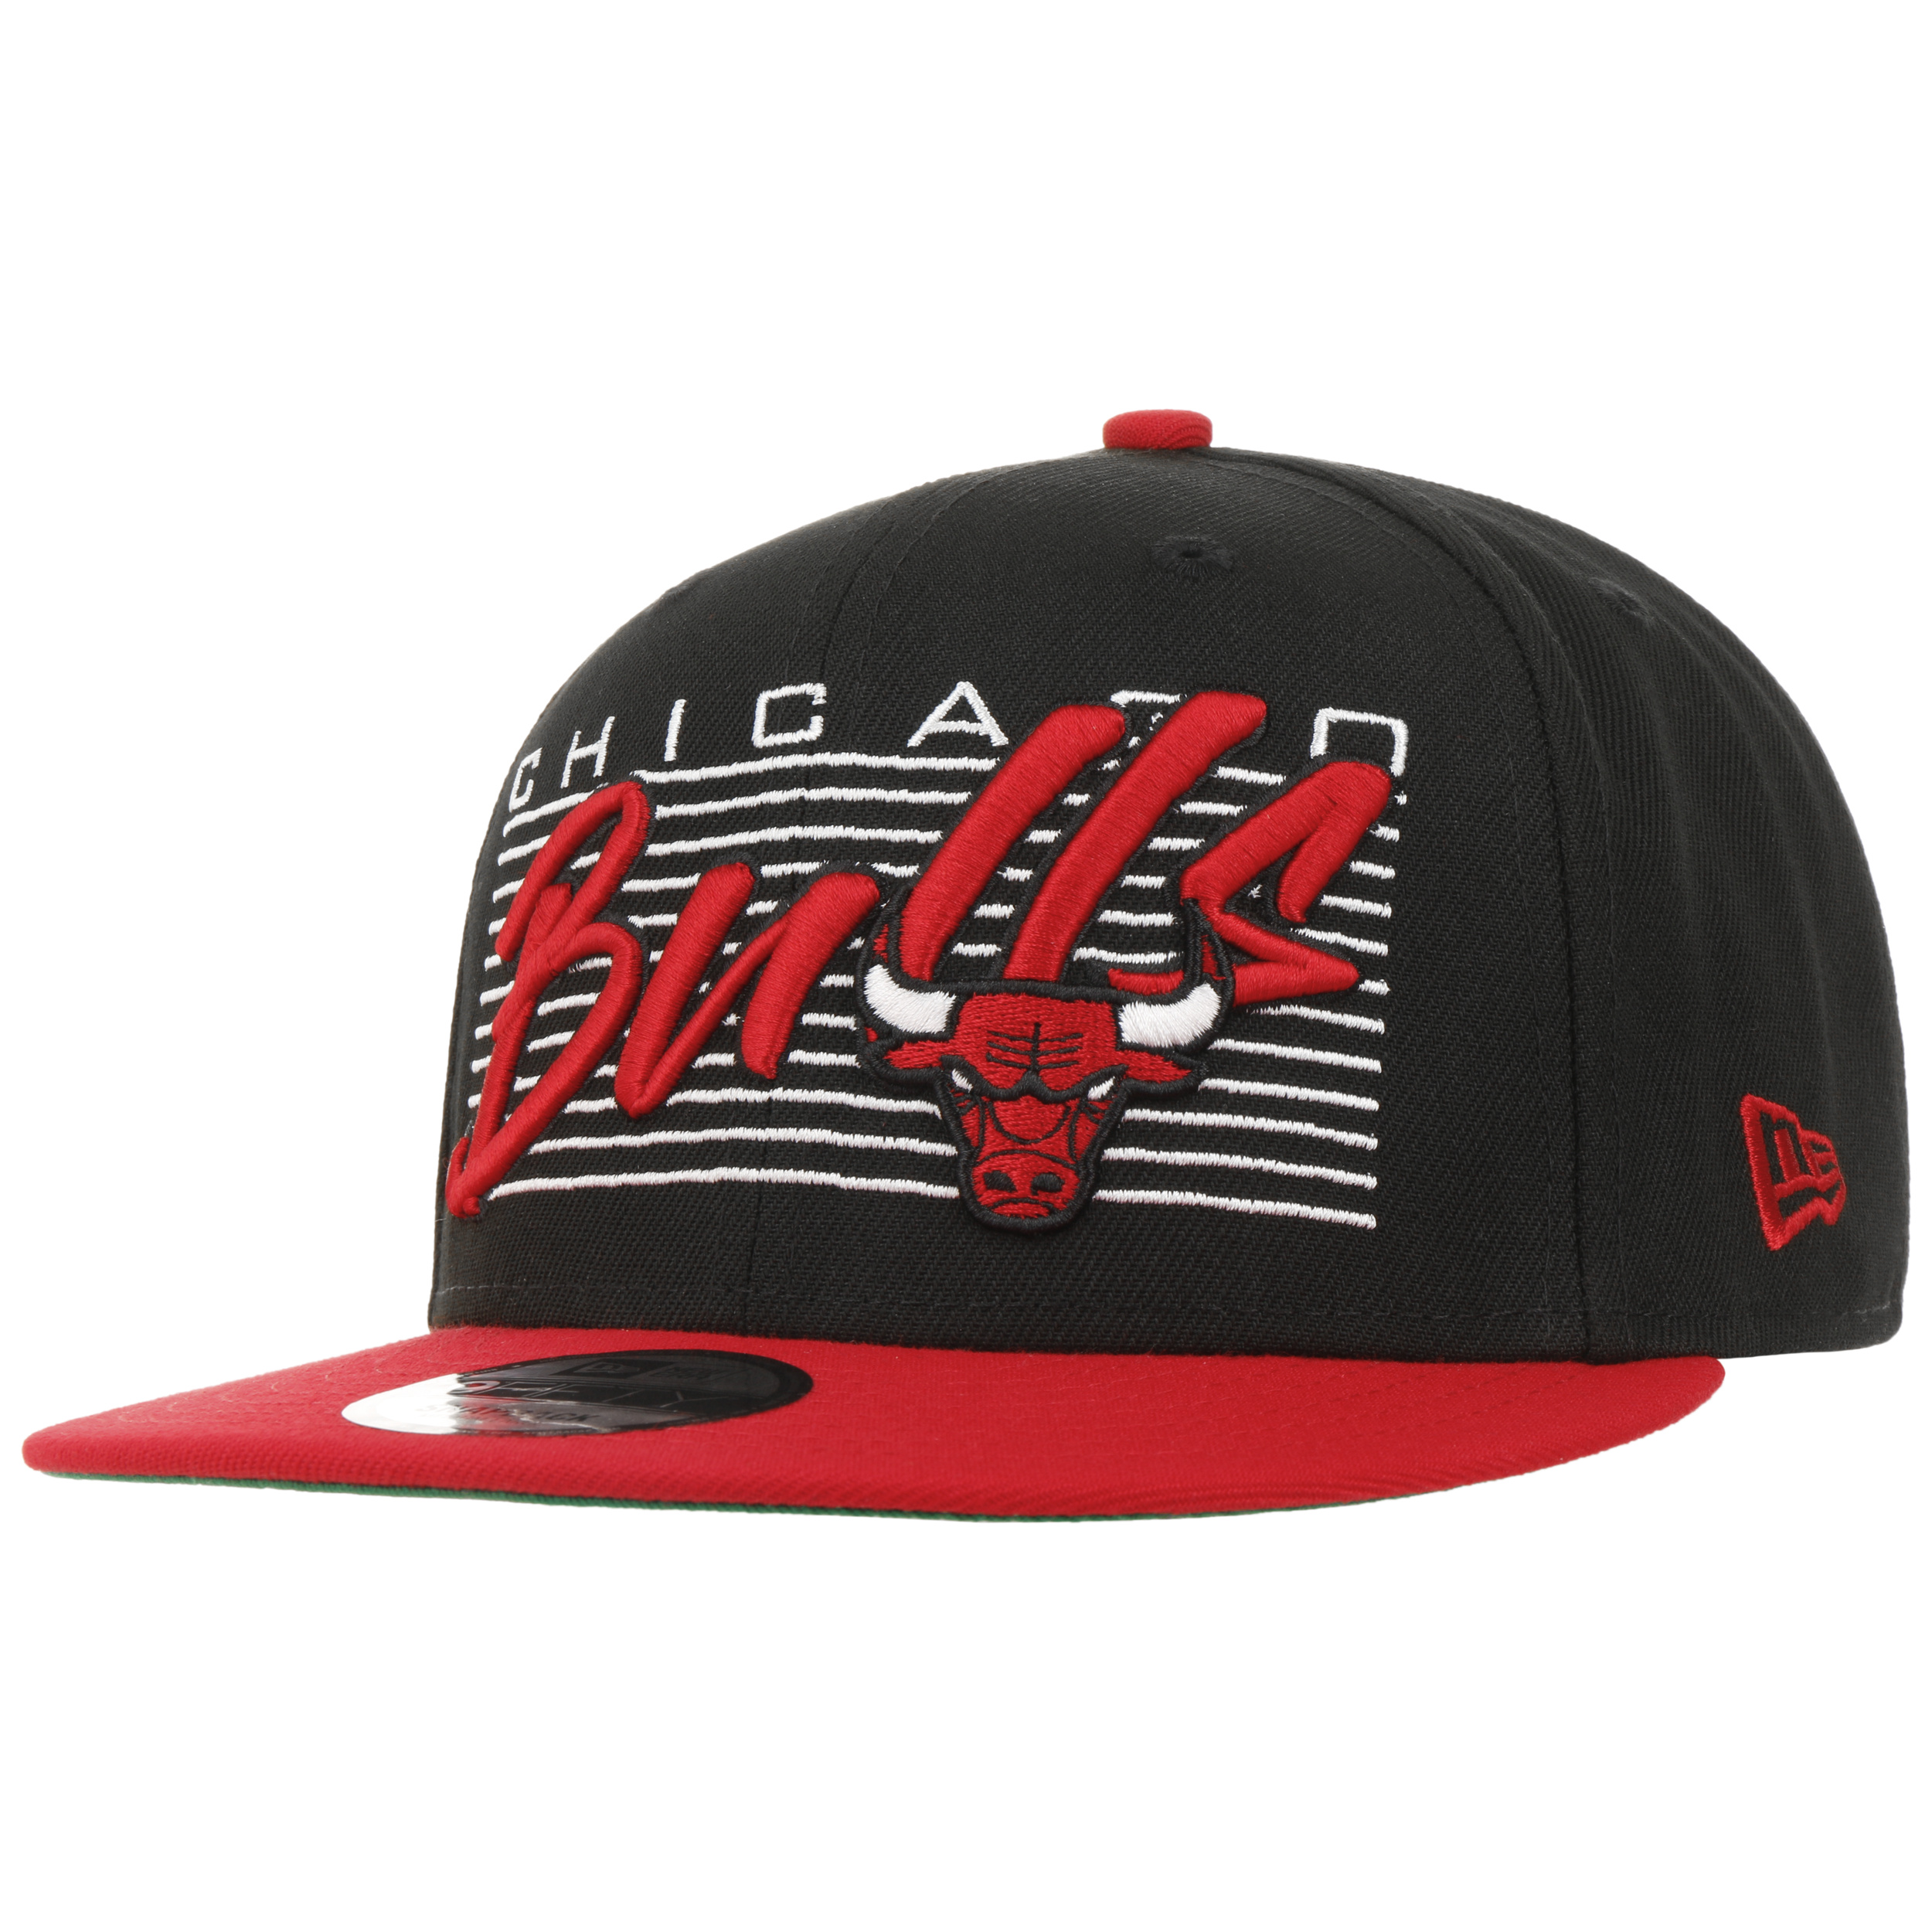 New York Red Bulls Hats, New York Red Bulls Fitted, Snapback Hats, Beanies